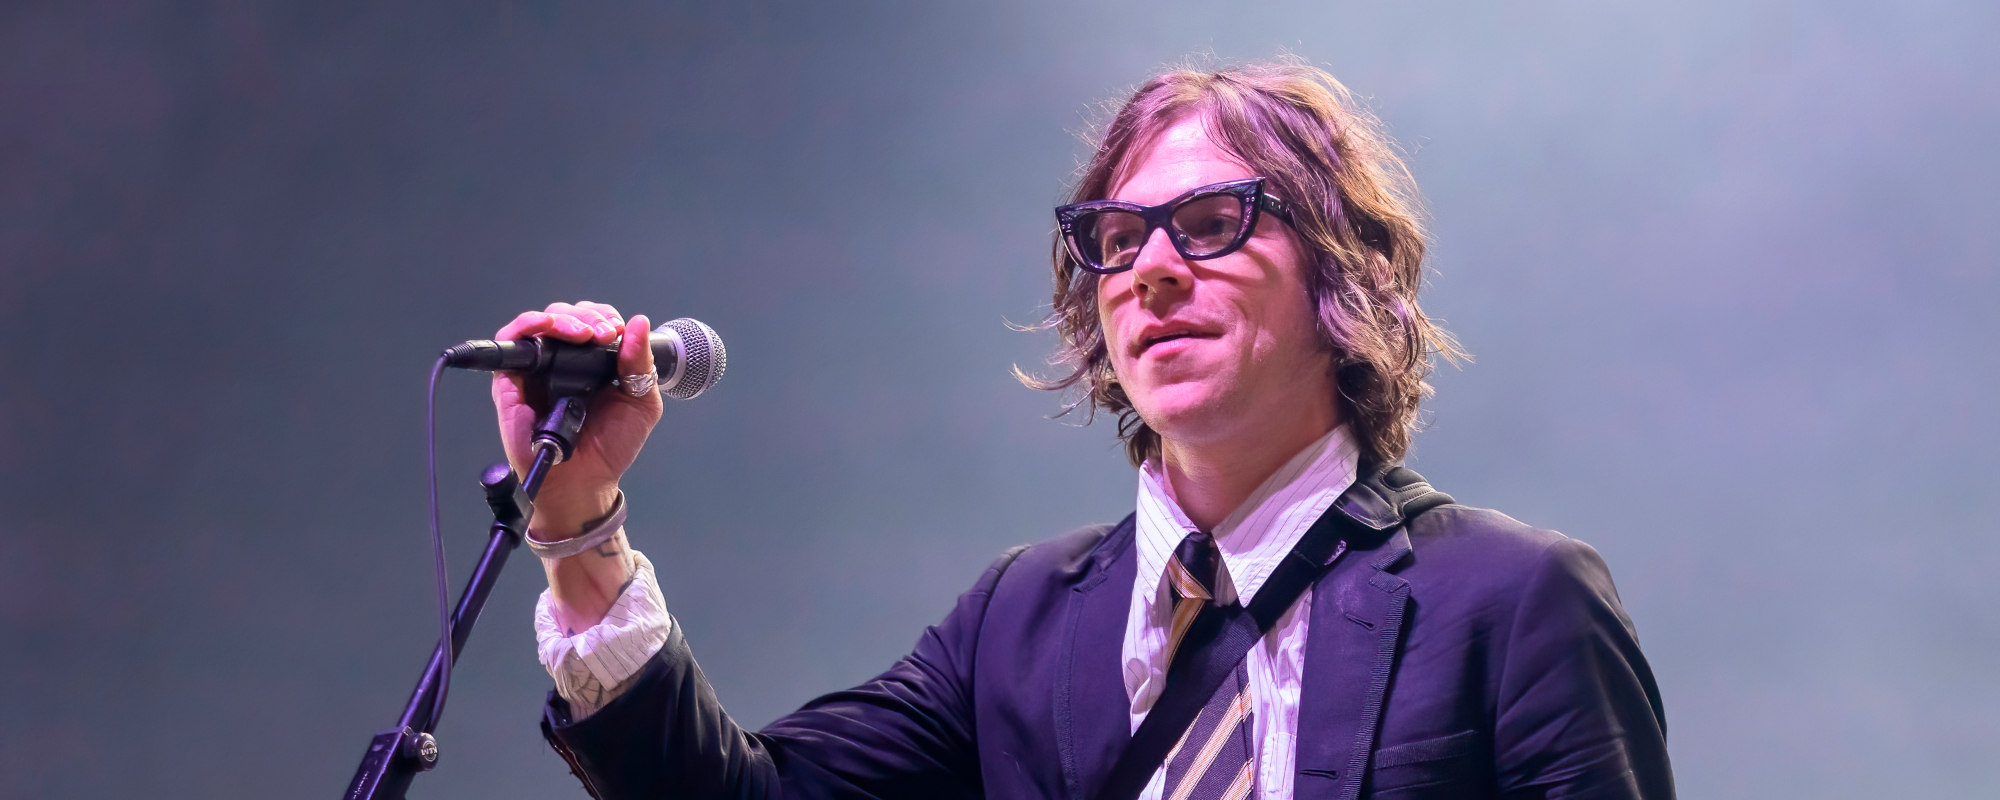 Cage The Elephant Singer Matthew Shultz Jailed on Weapons Charges in NYC